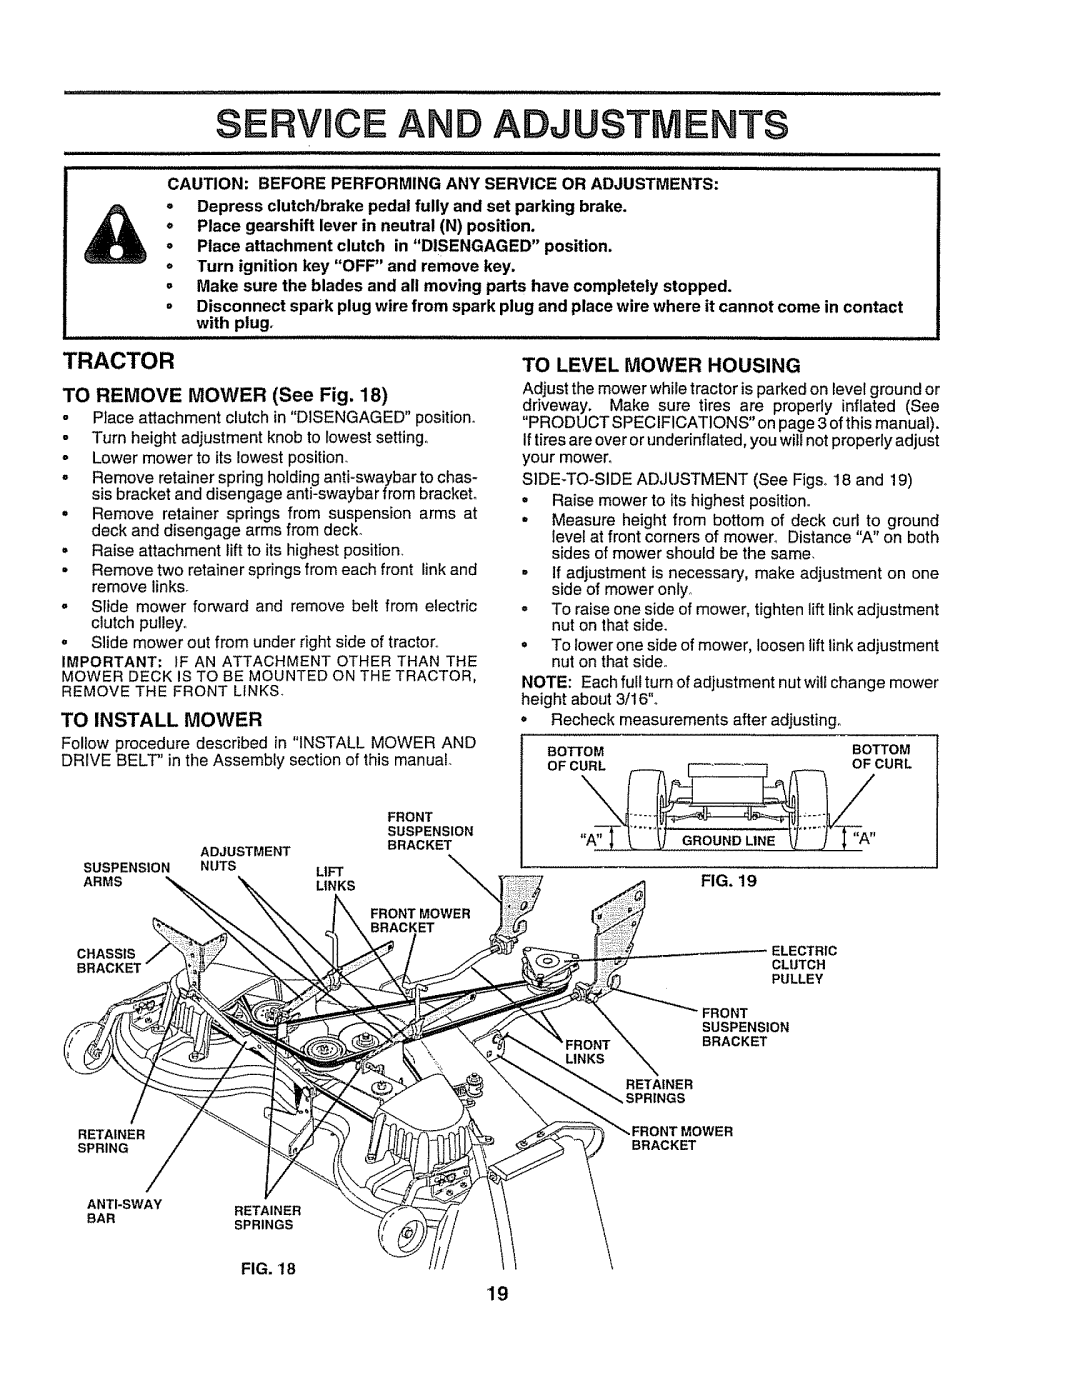 Craftsman 917O251550 SERVmCE AND ADJUSTMENTS, To Install Mower, o Place attachment clutch in DISENGAGED position 